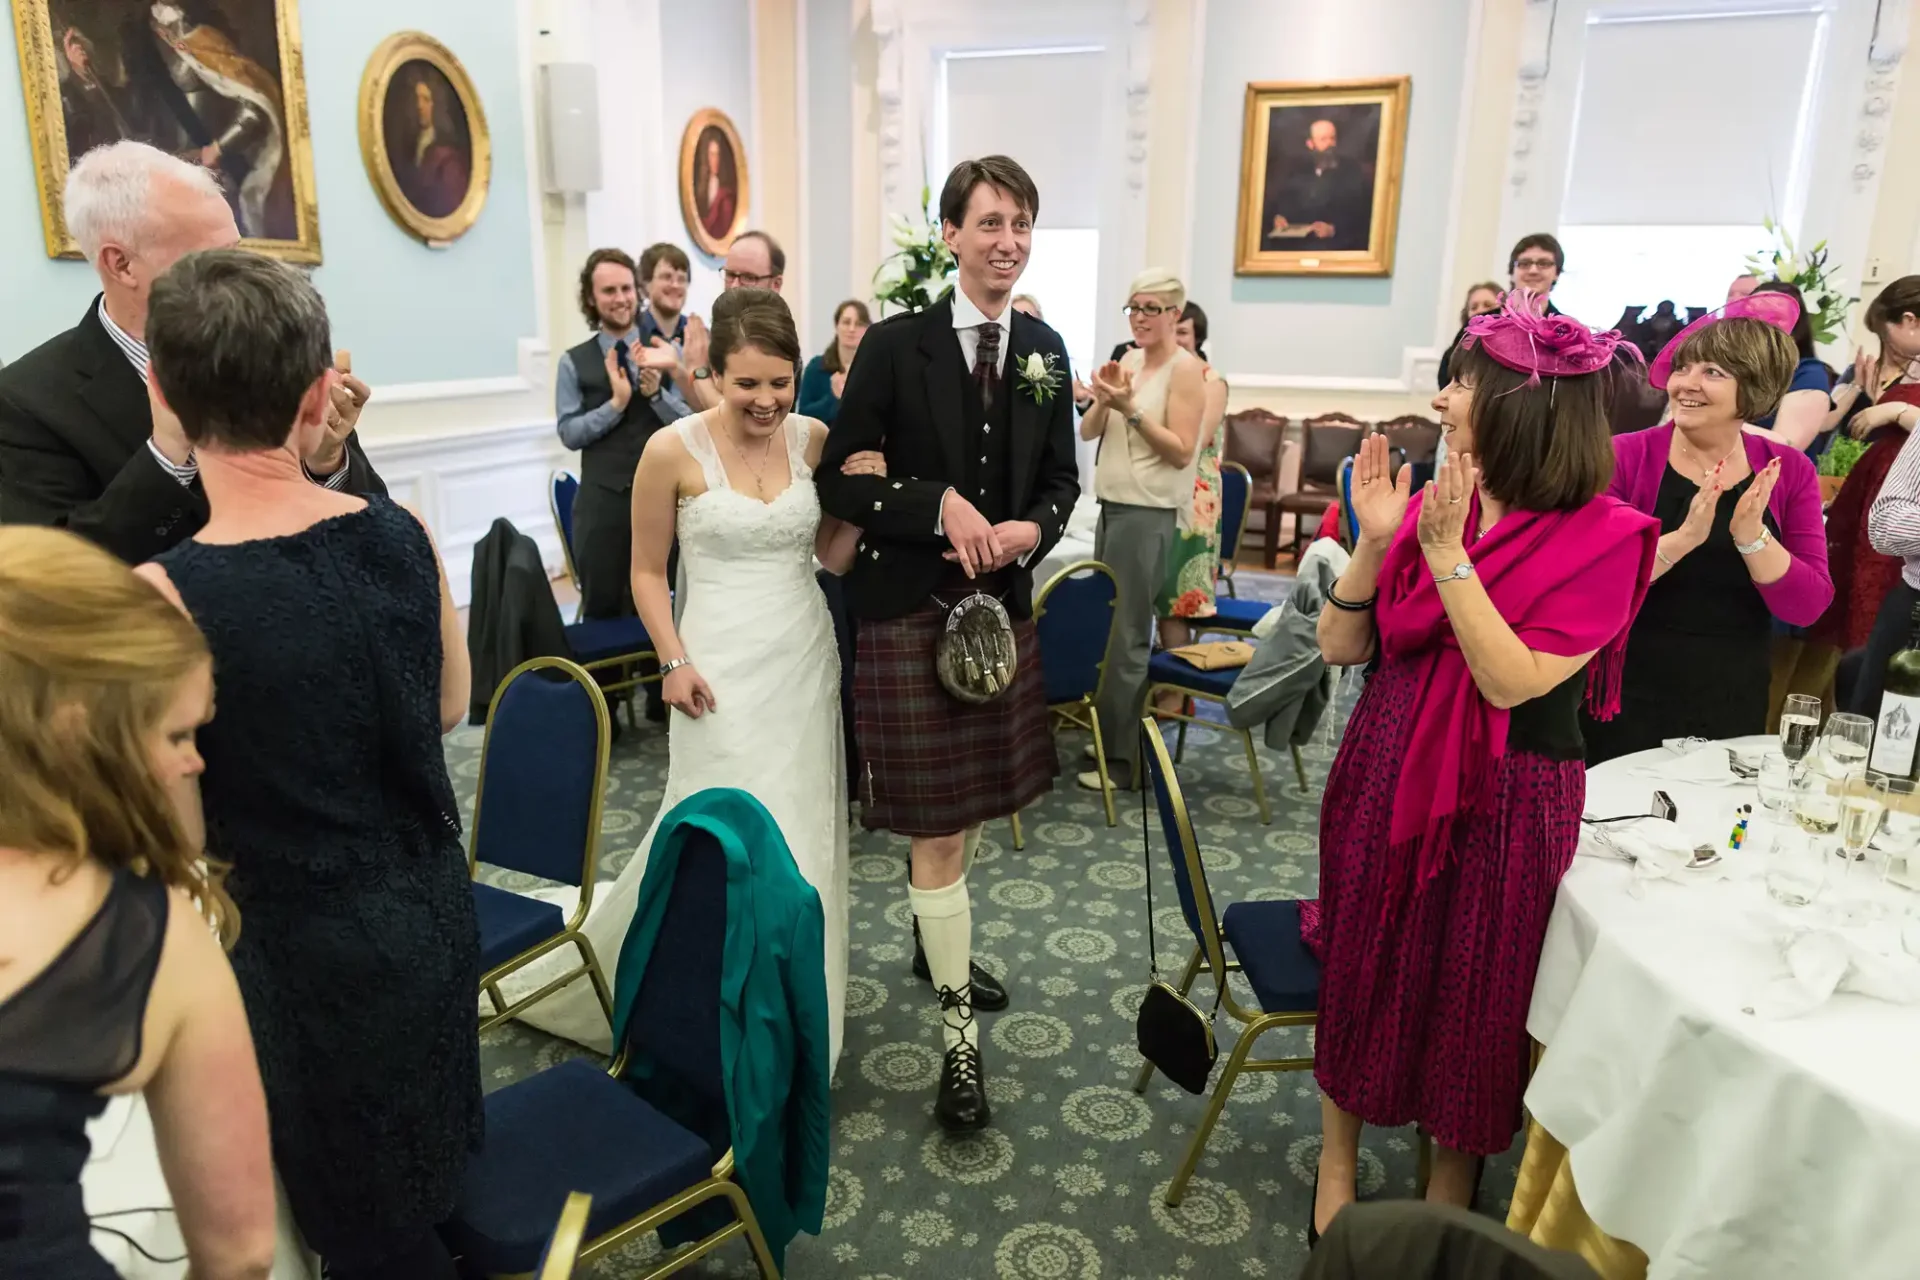 Bride and groom walking joyfully through a clapping crowd in a banquet hall, the groom dressed in a kilt and the bride in a white gown.